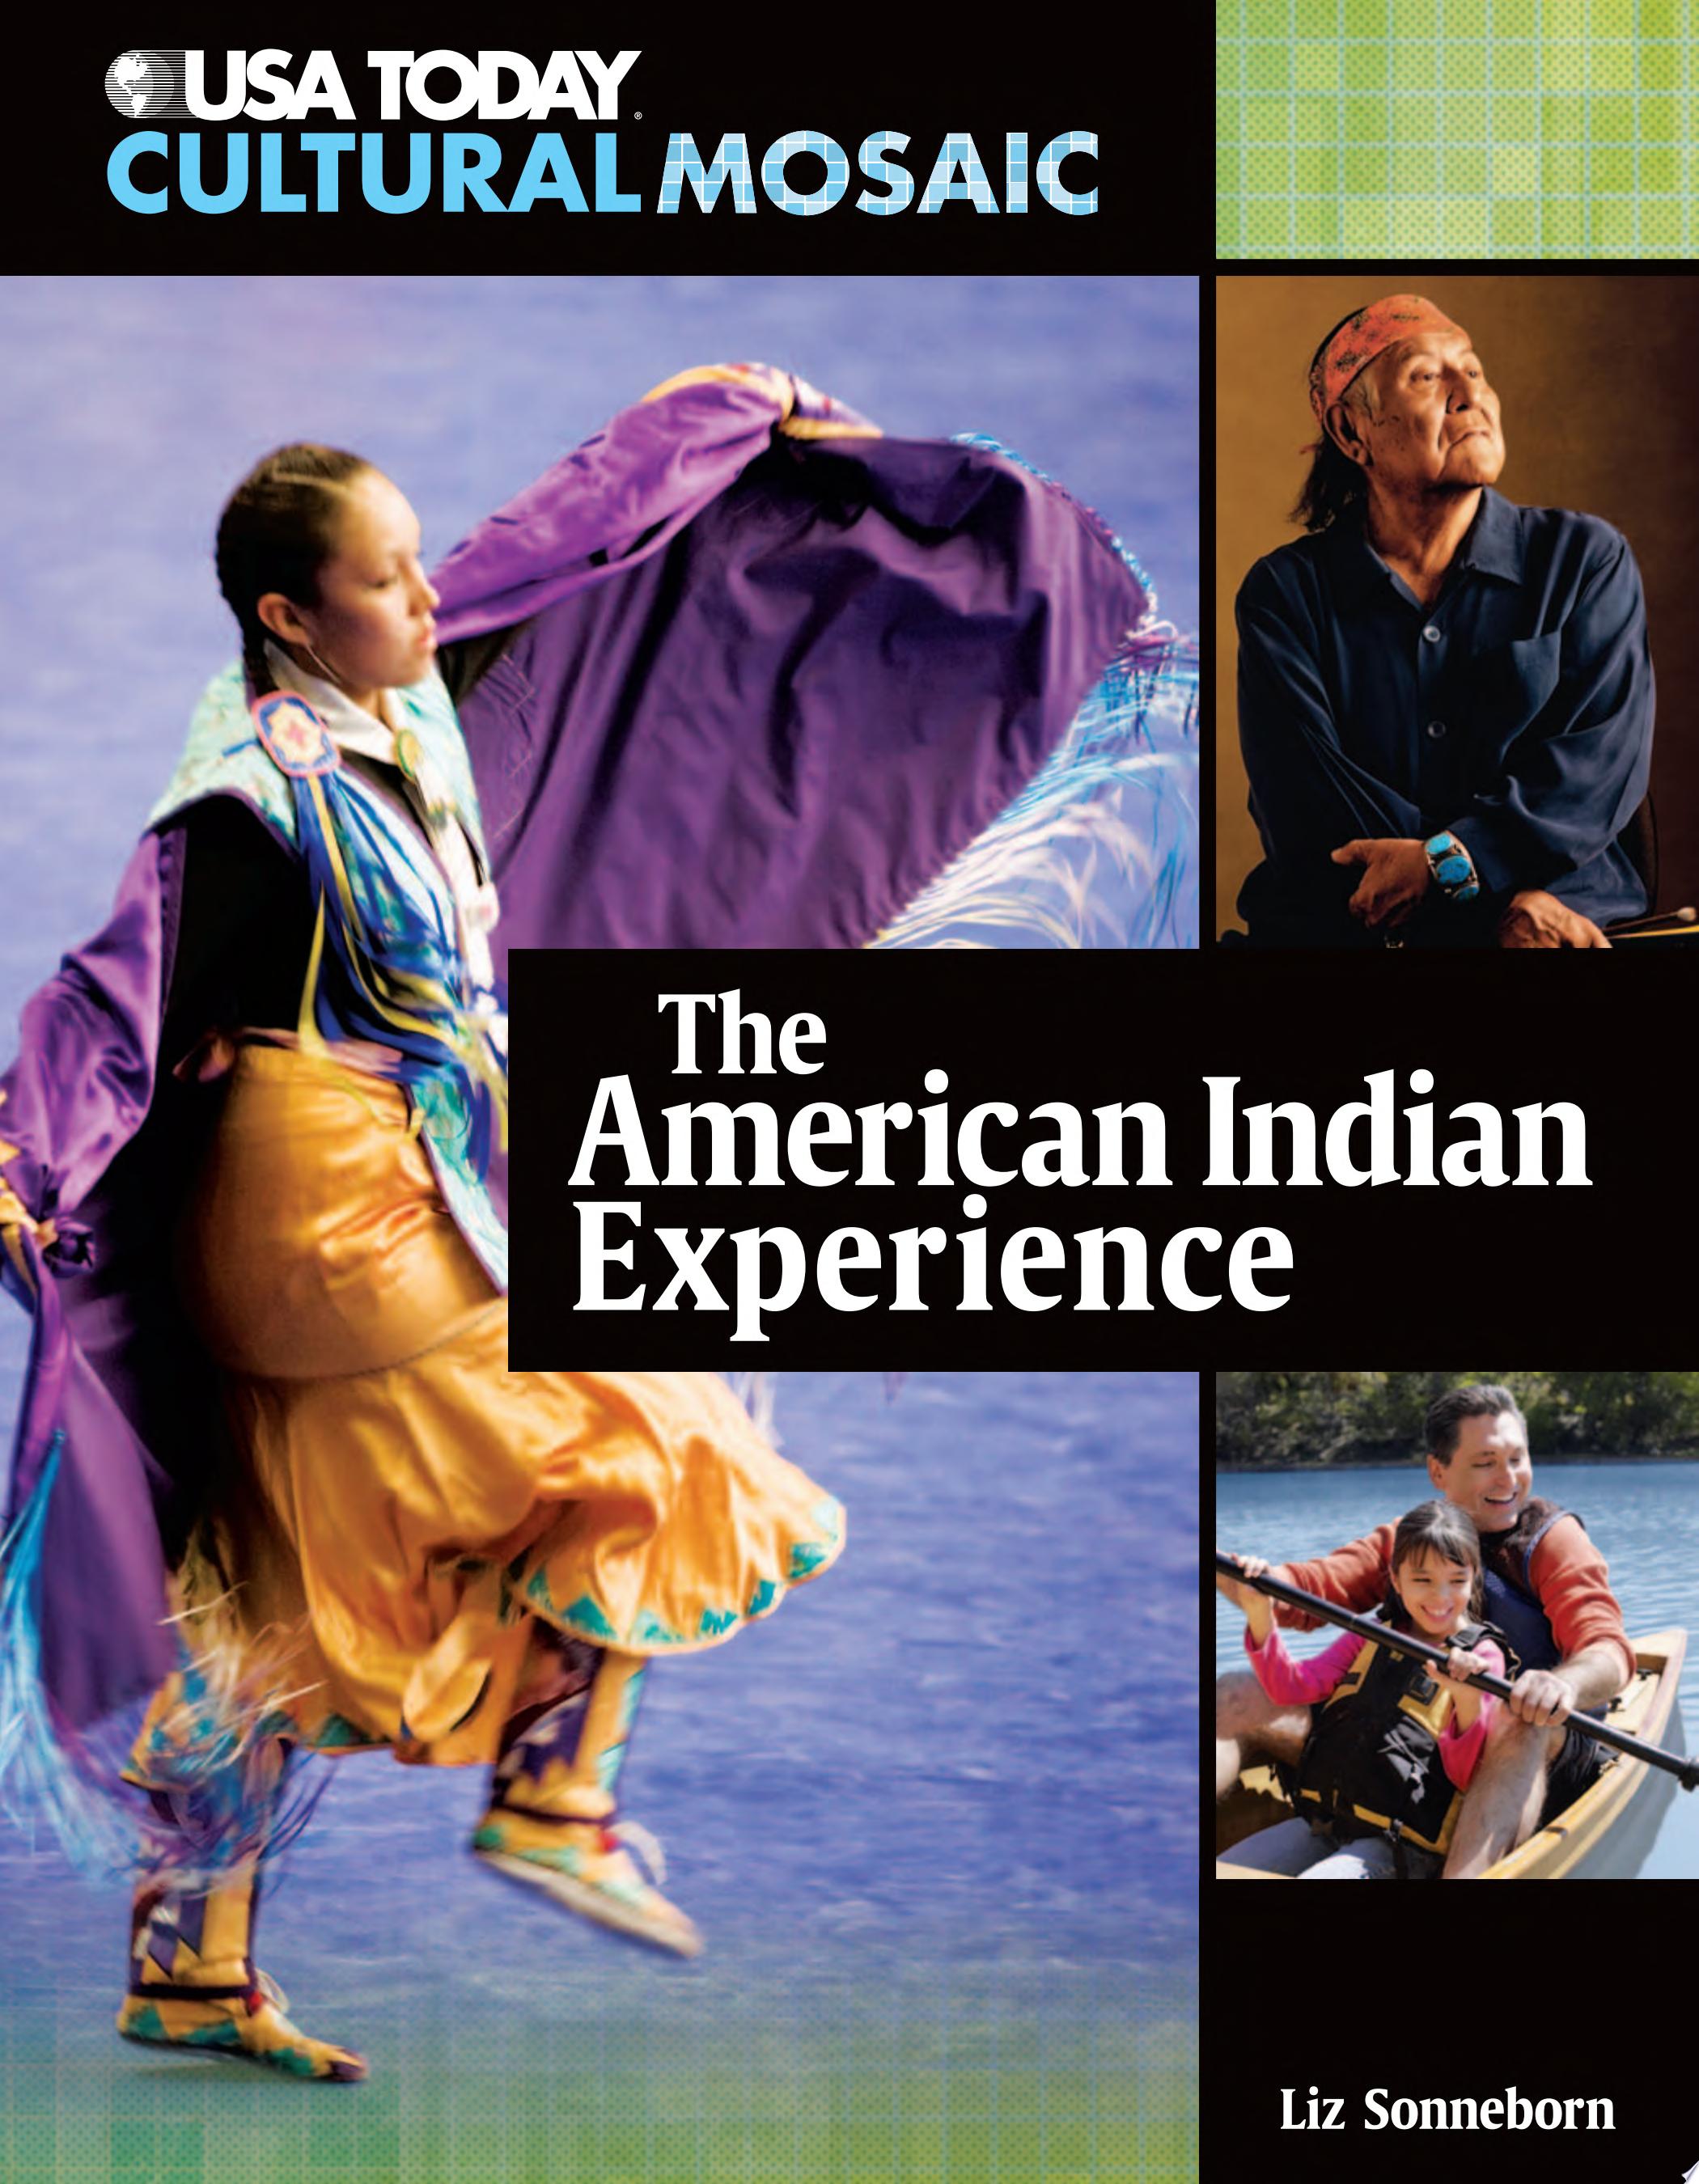 Image for "The American Indian Experience"